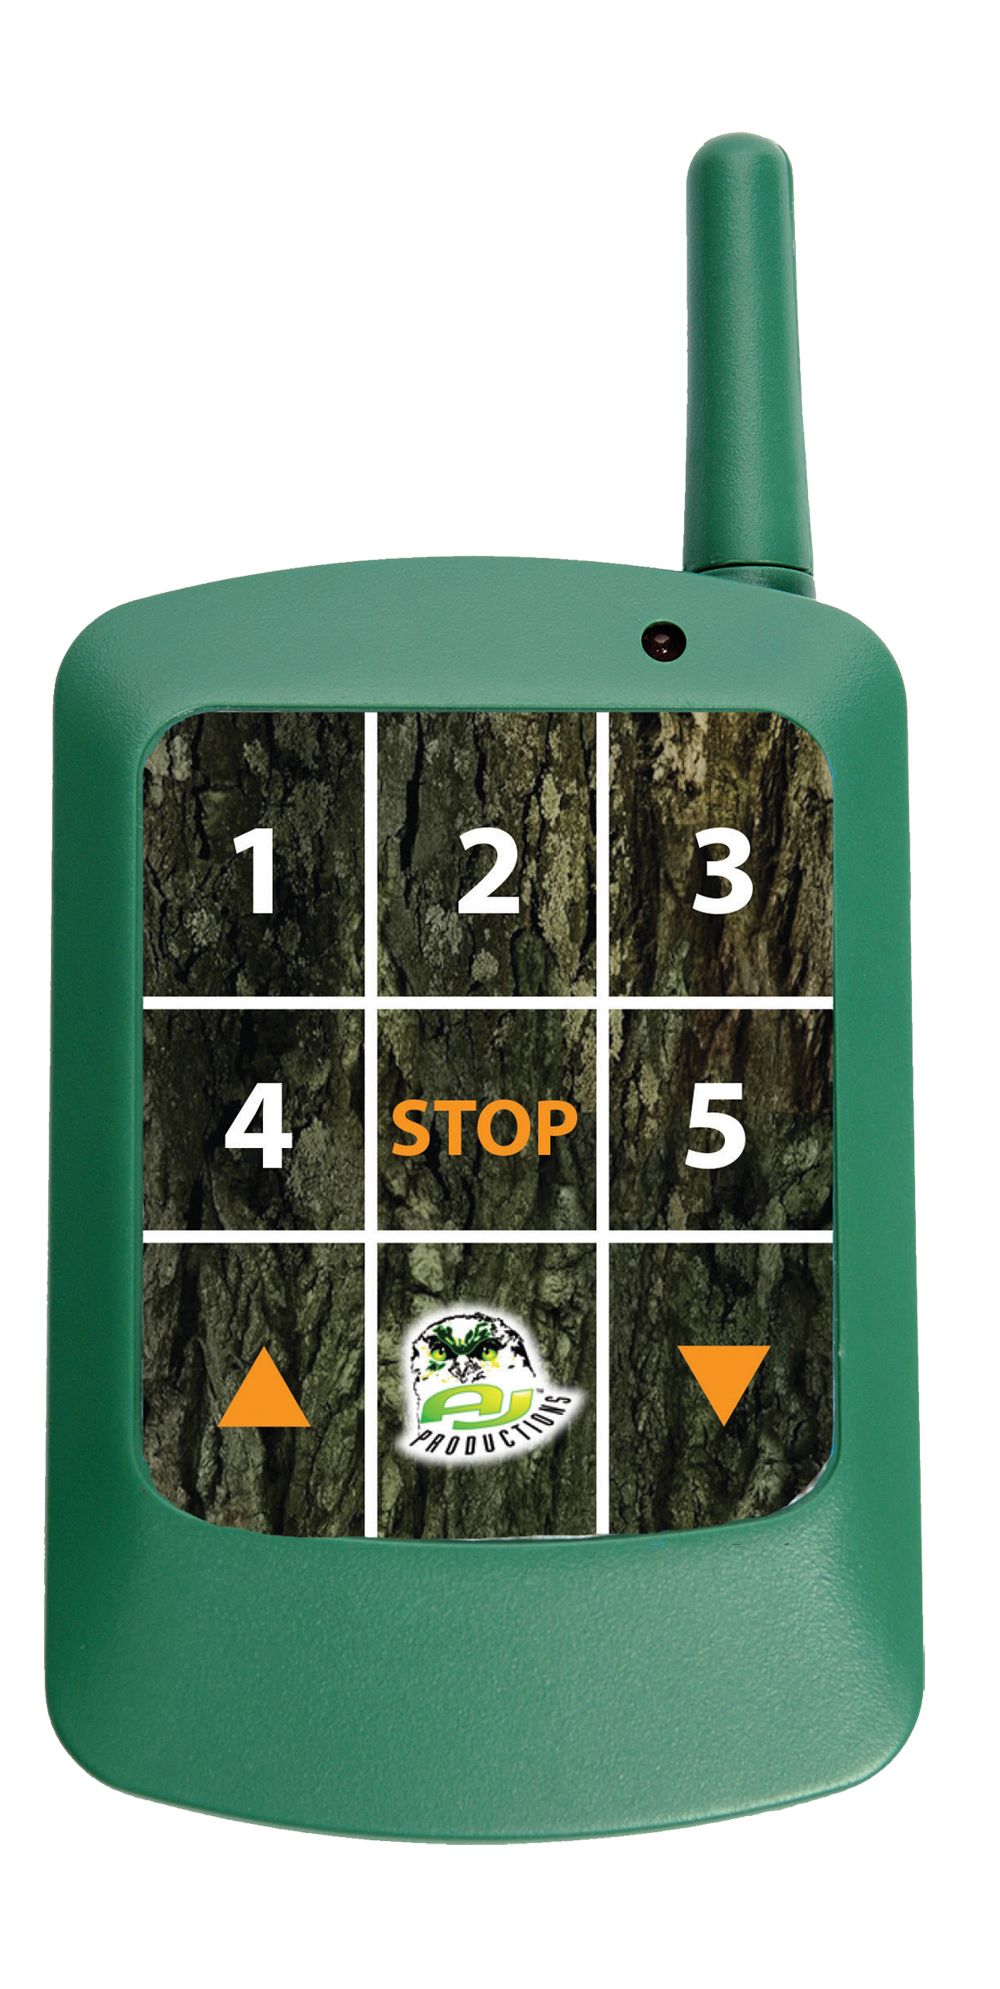 Remote Controller for the Universal Game Caller - Green